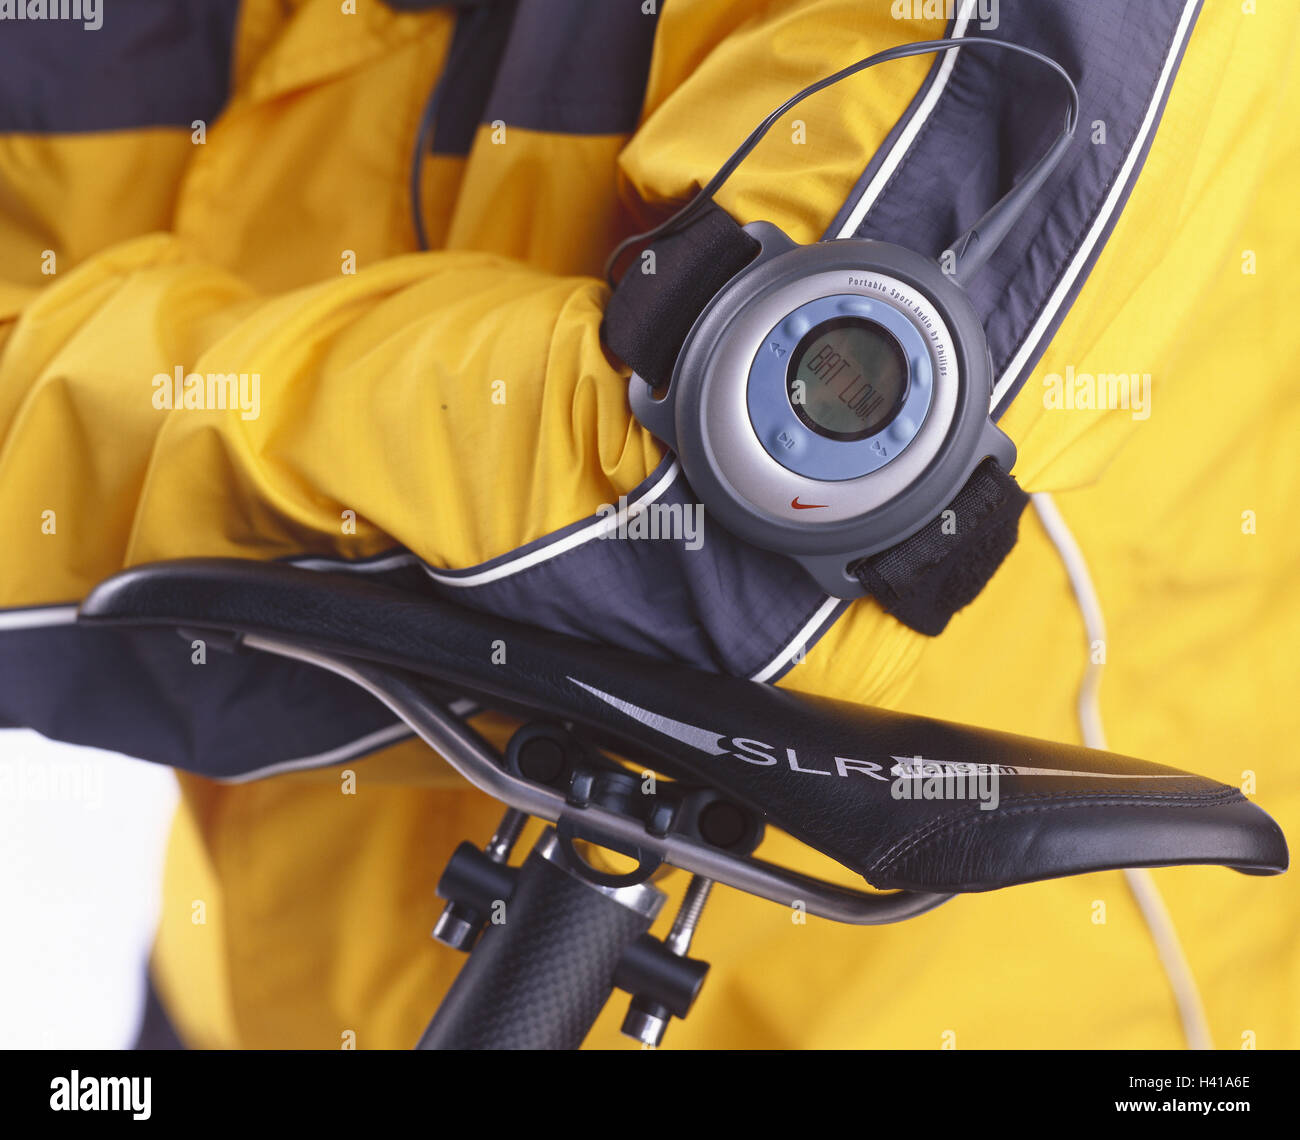 Mountain biker, detail, MP3 player, waterproof, hobby, leisure time, sport, sportsman, fun, fitness, equipment, accessories, equipment, Portably sport audio by Philips, player MP3, waterproof, mark Nike, consumer electronics, riding of a bike, bicycle driving, biking, Mountainbiken, motion, activity, sportily, leisure time sport Stock Photo